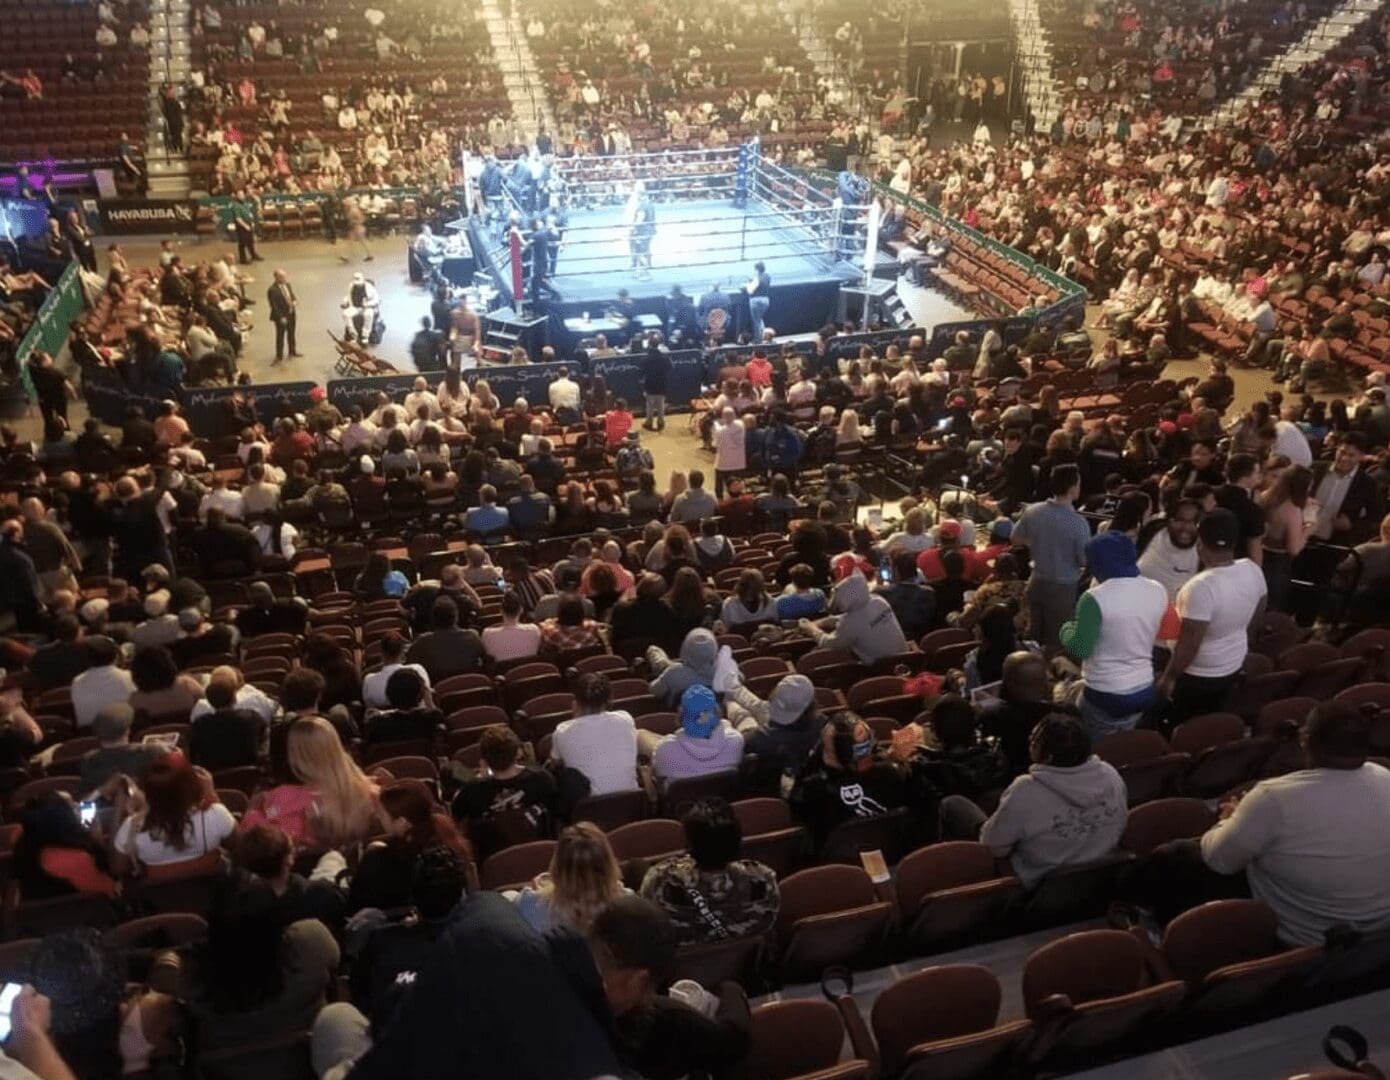 CES Boxing fans eagerly watching a thrilling match in an arena.